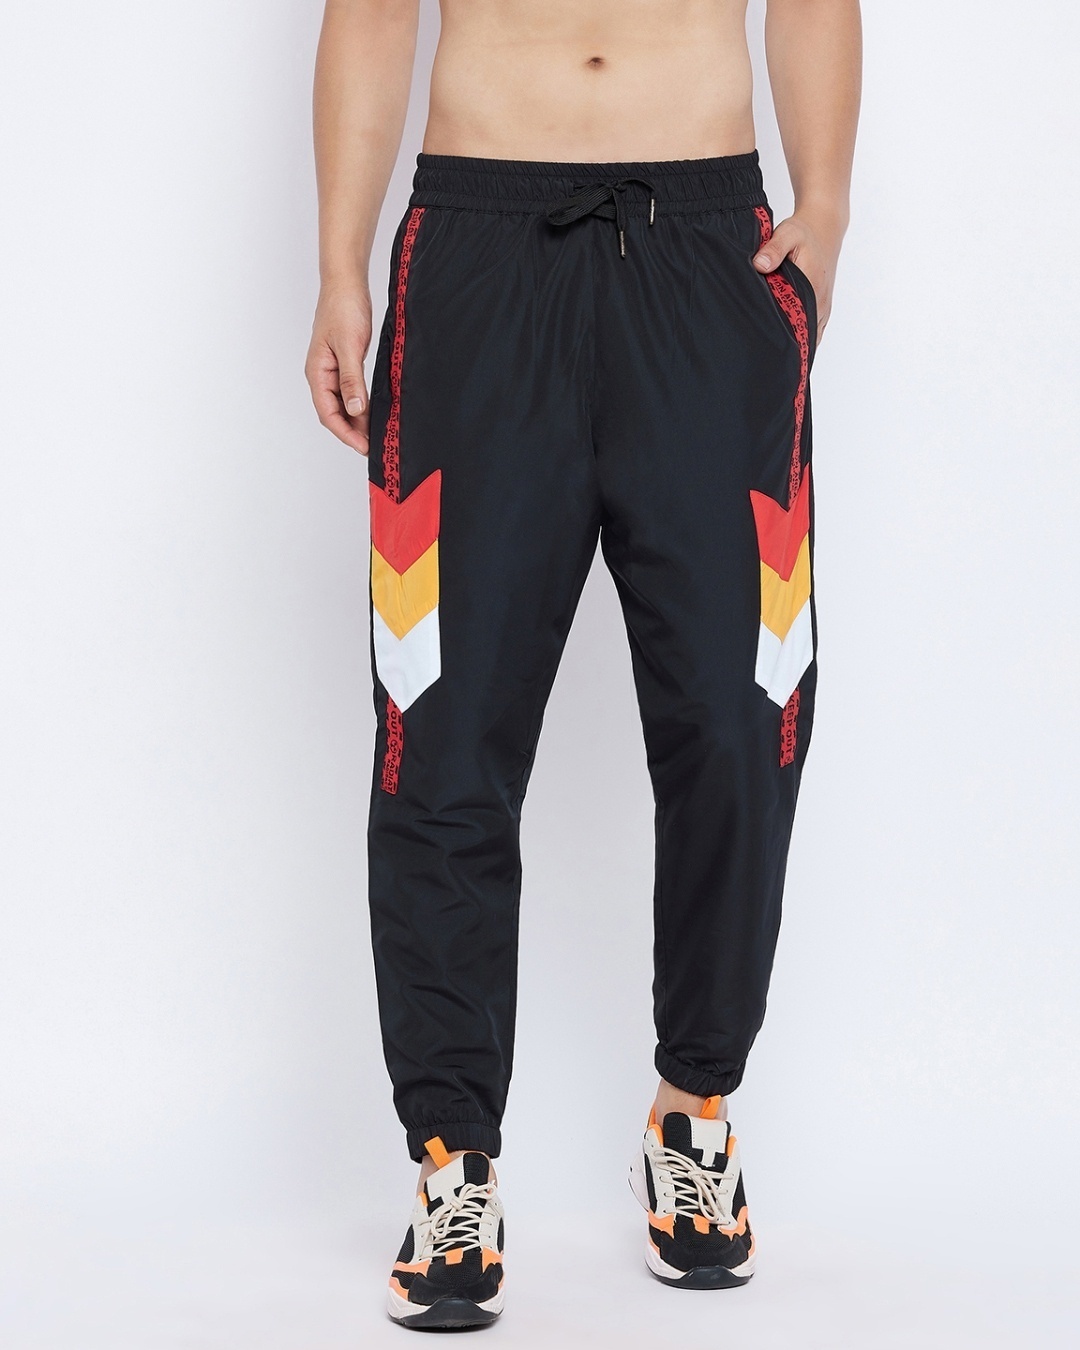 fugazee men s black cut and sew taped light weight slim fit trackpants 455169 1655919993 1